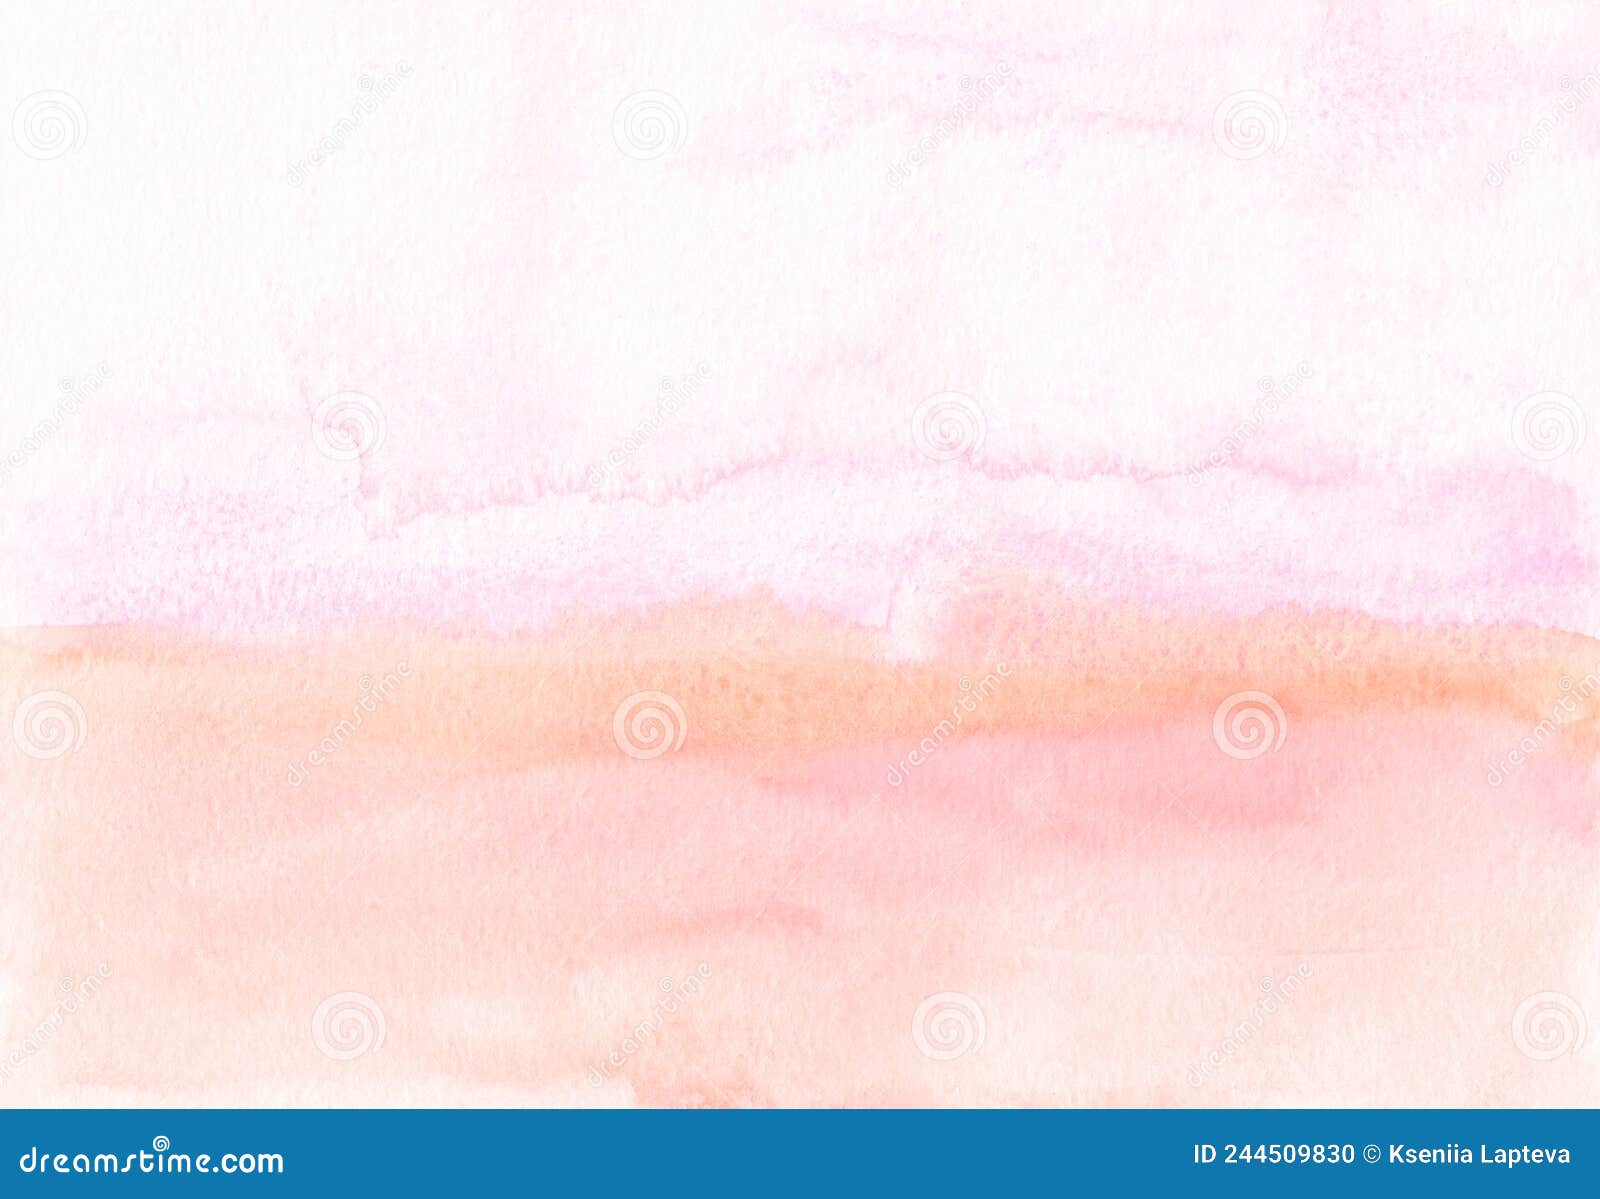 Bright pink watercolor background texture. Gradient pink aquarelle